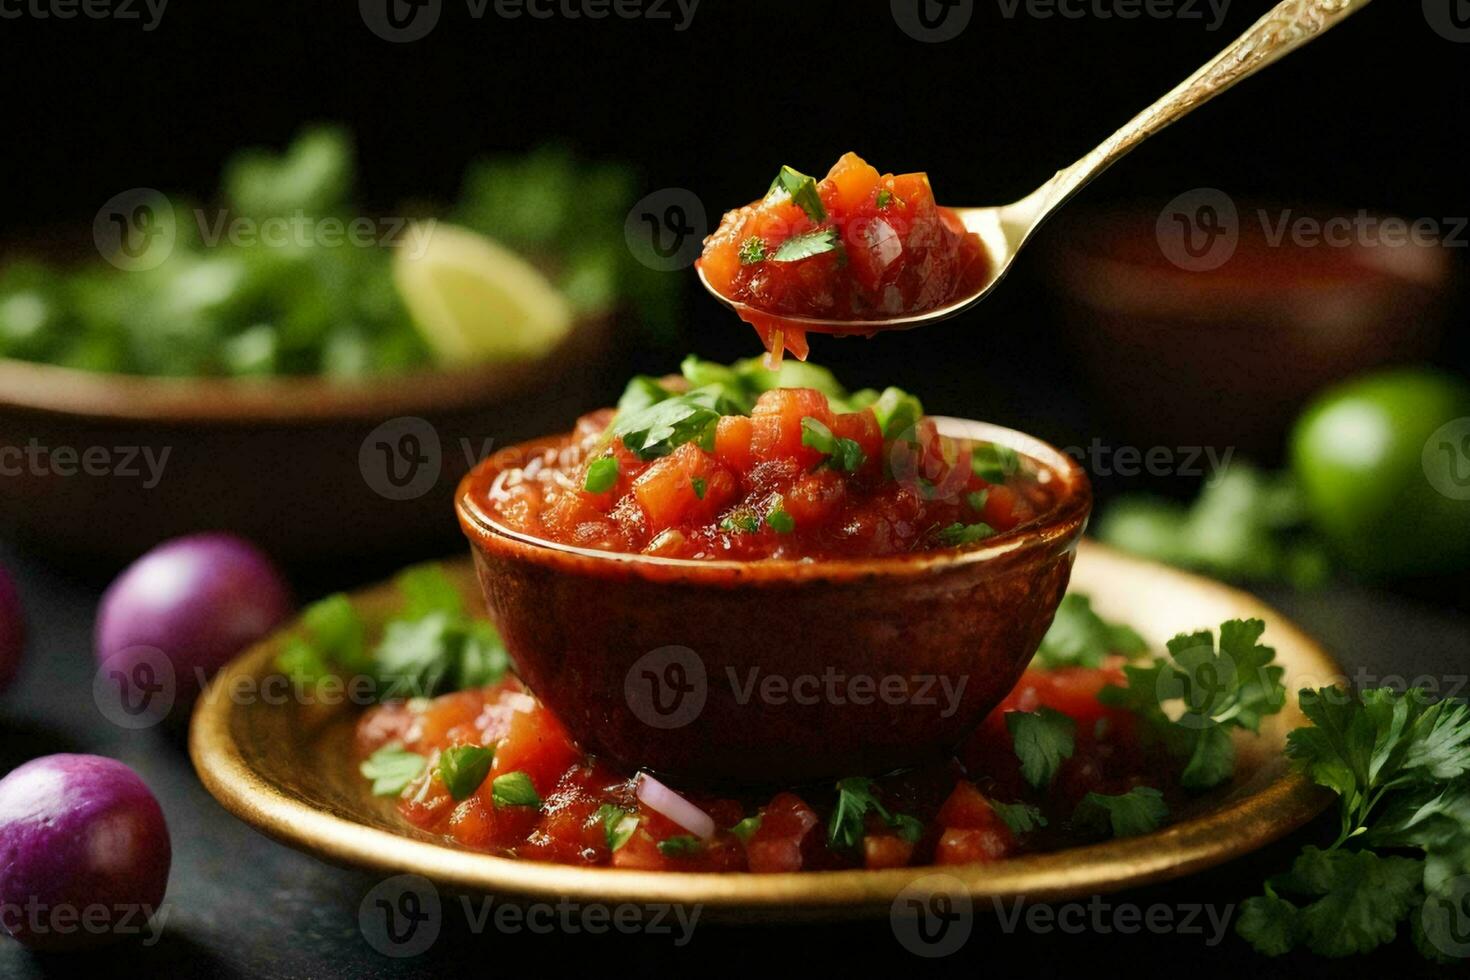 a spoonful of salsa. The salsa is made of diced tomatoes, red onions, and cilantro. photo